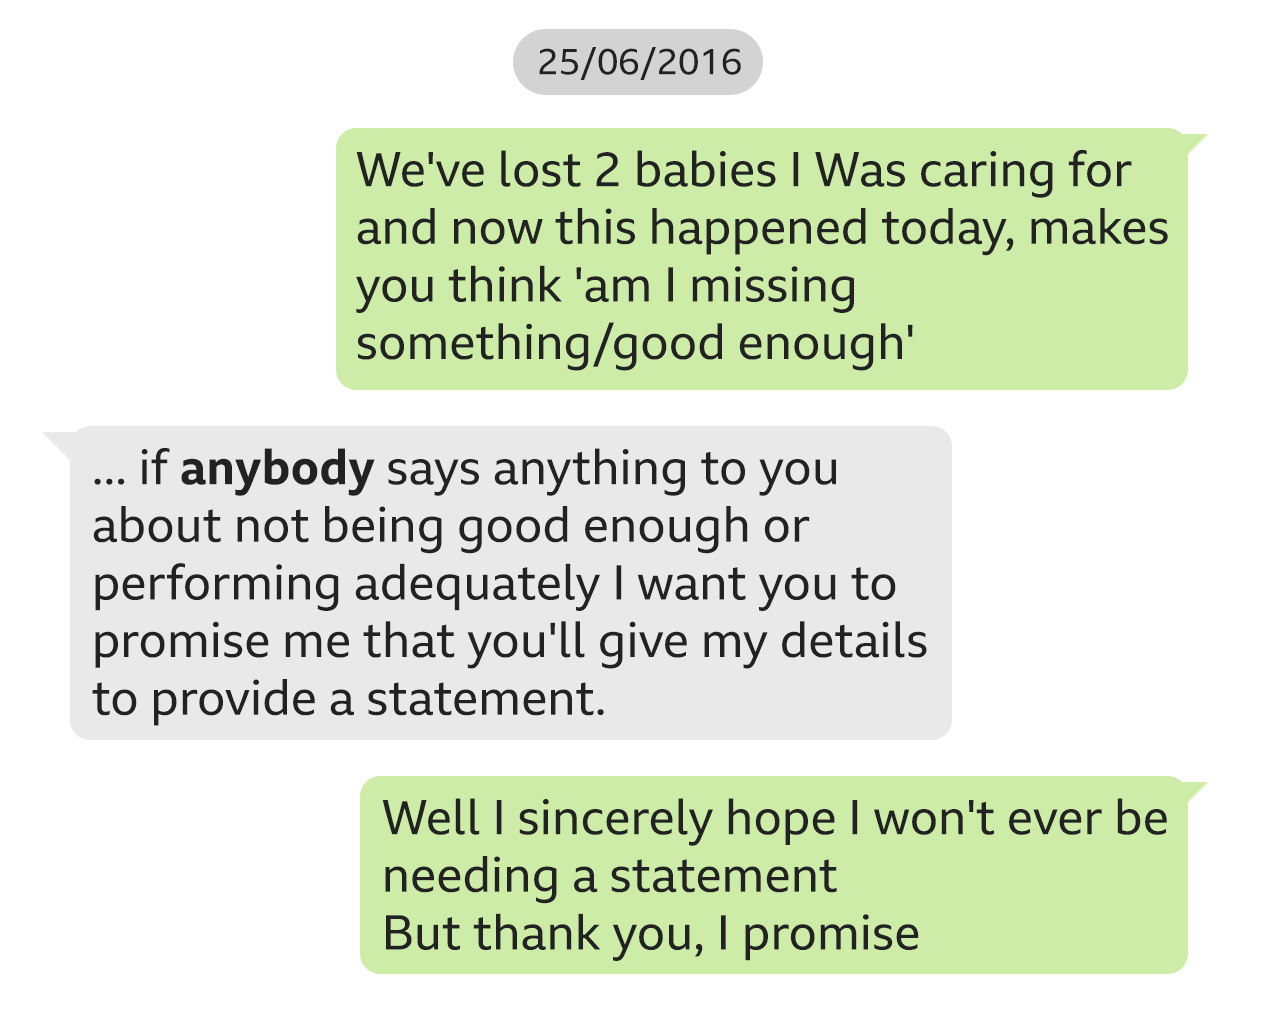 Text messages between Lucy Letby and a doctor on 25 June 2016. Letby says: "We've lost 2 babies I Was caring for and now this happened today, makes you think 'am I missing something/good enough'". The doctor replies: "if *anybody* says anything to you about not being good enough or performing adequately I want you to promise me that you'll give my details to provide a statement." Letby says: "Well I sincerely hope I won't ever be needing a statement. But thank you, I promise".